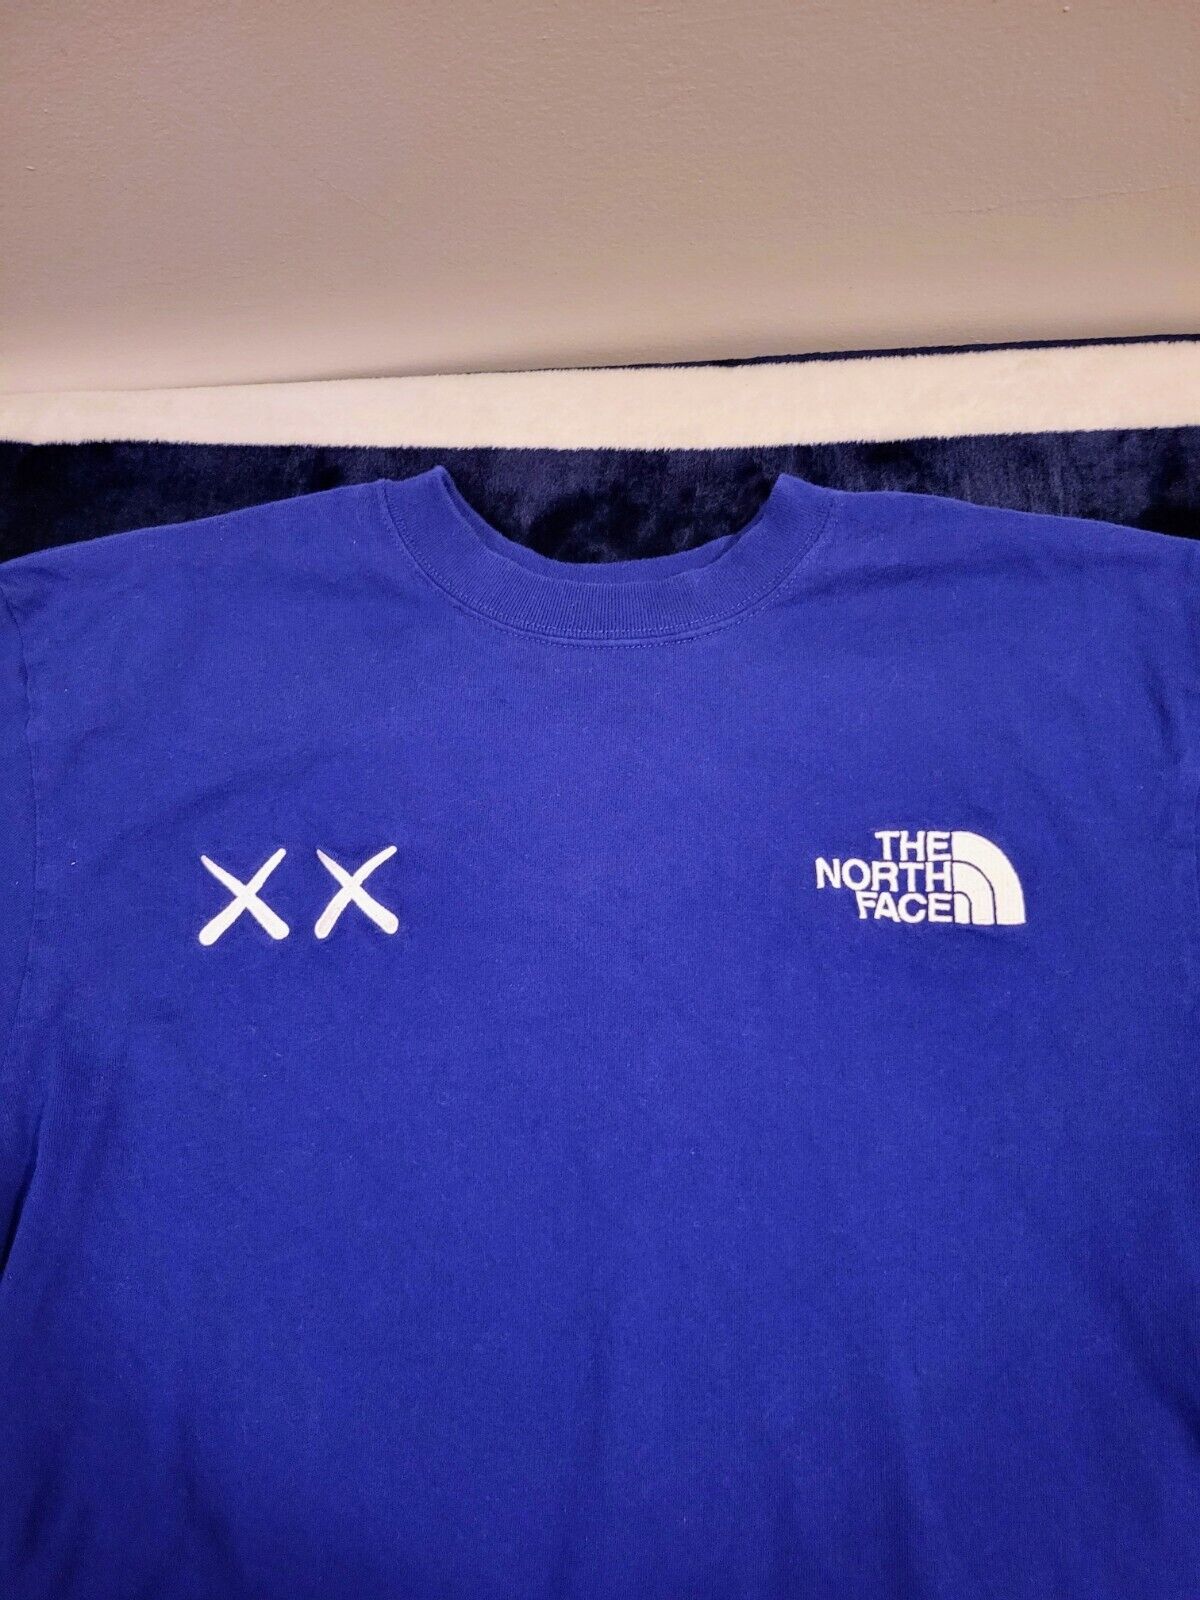 The North Face x KAWS TNF Suede Blue / White Logo T-Shirt Mens Size Small